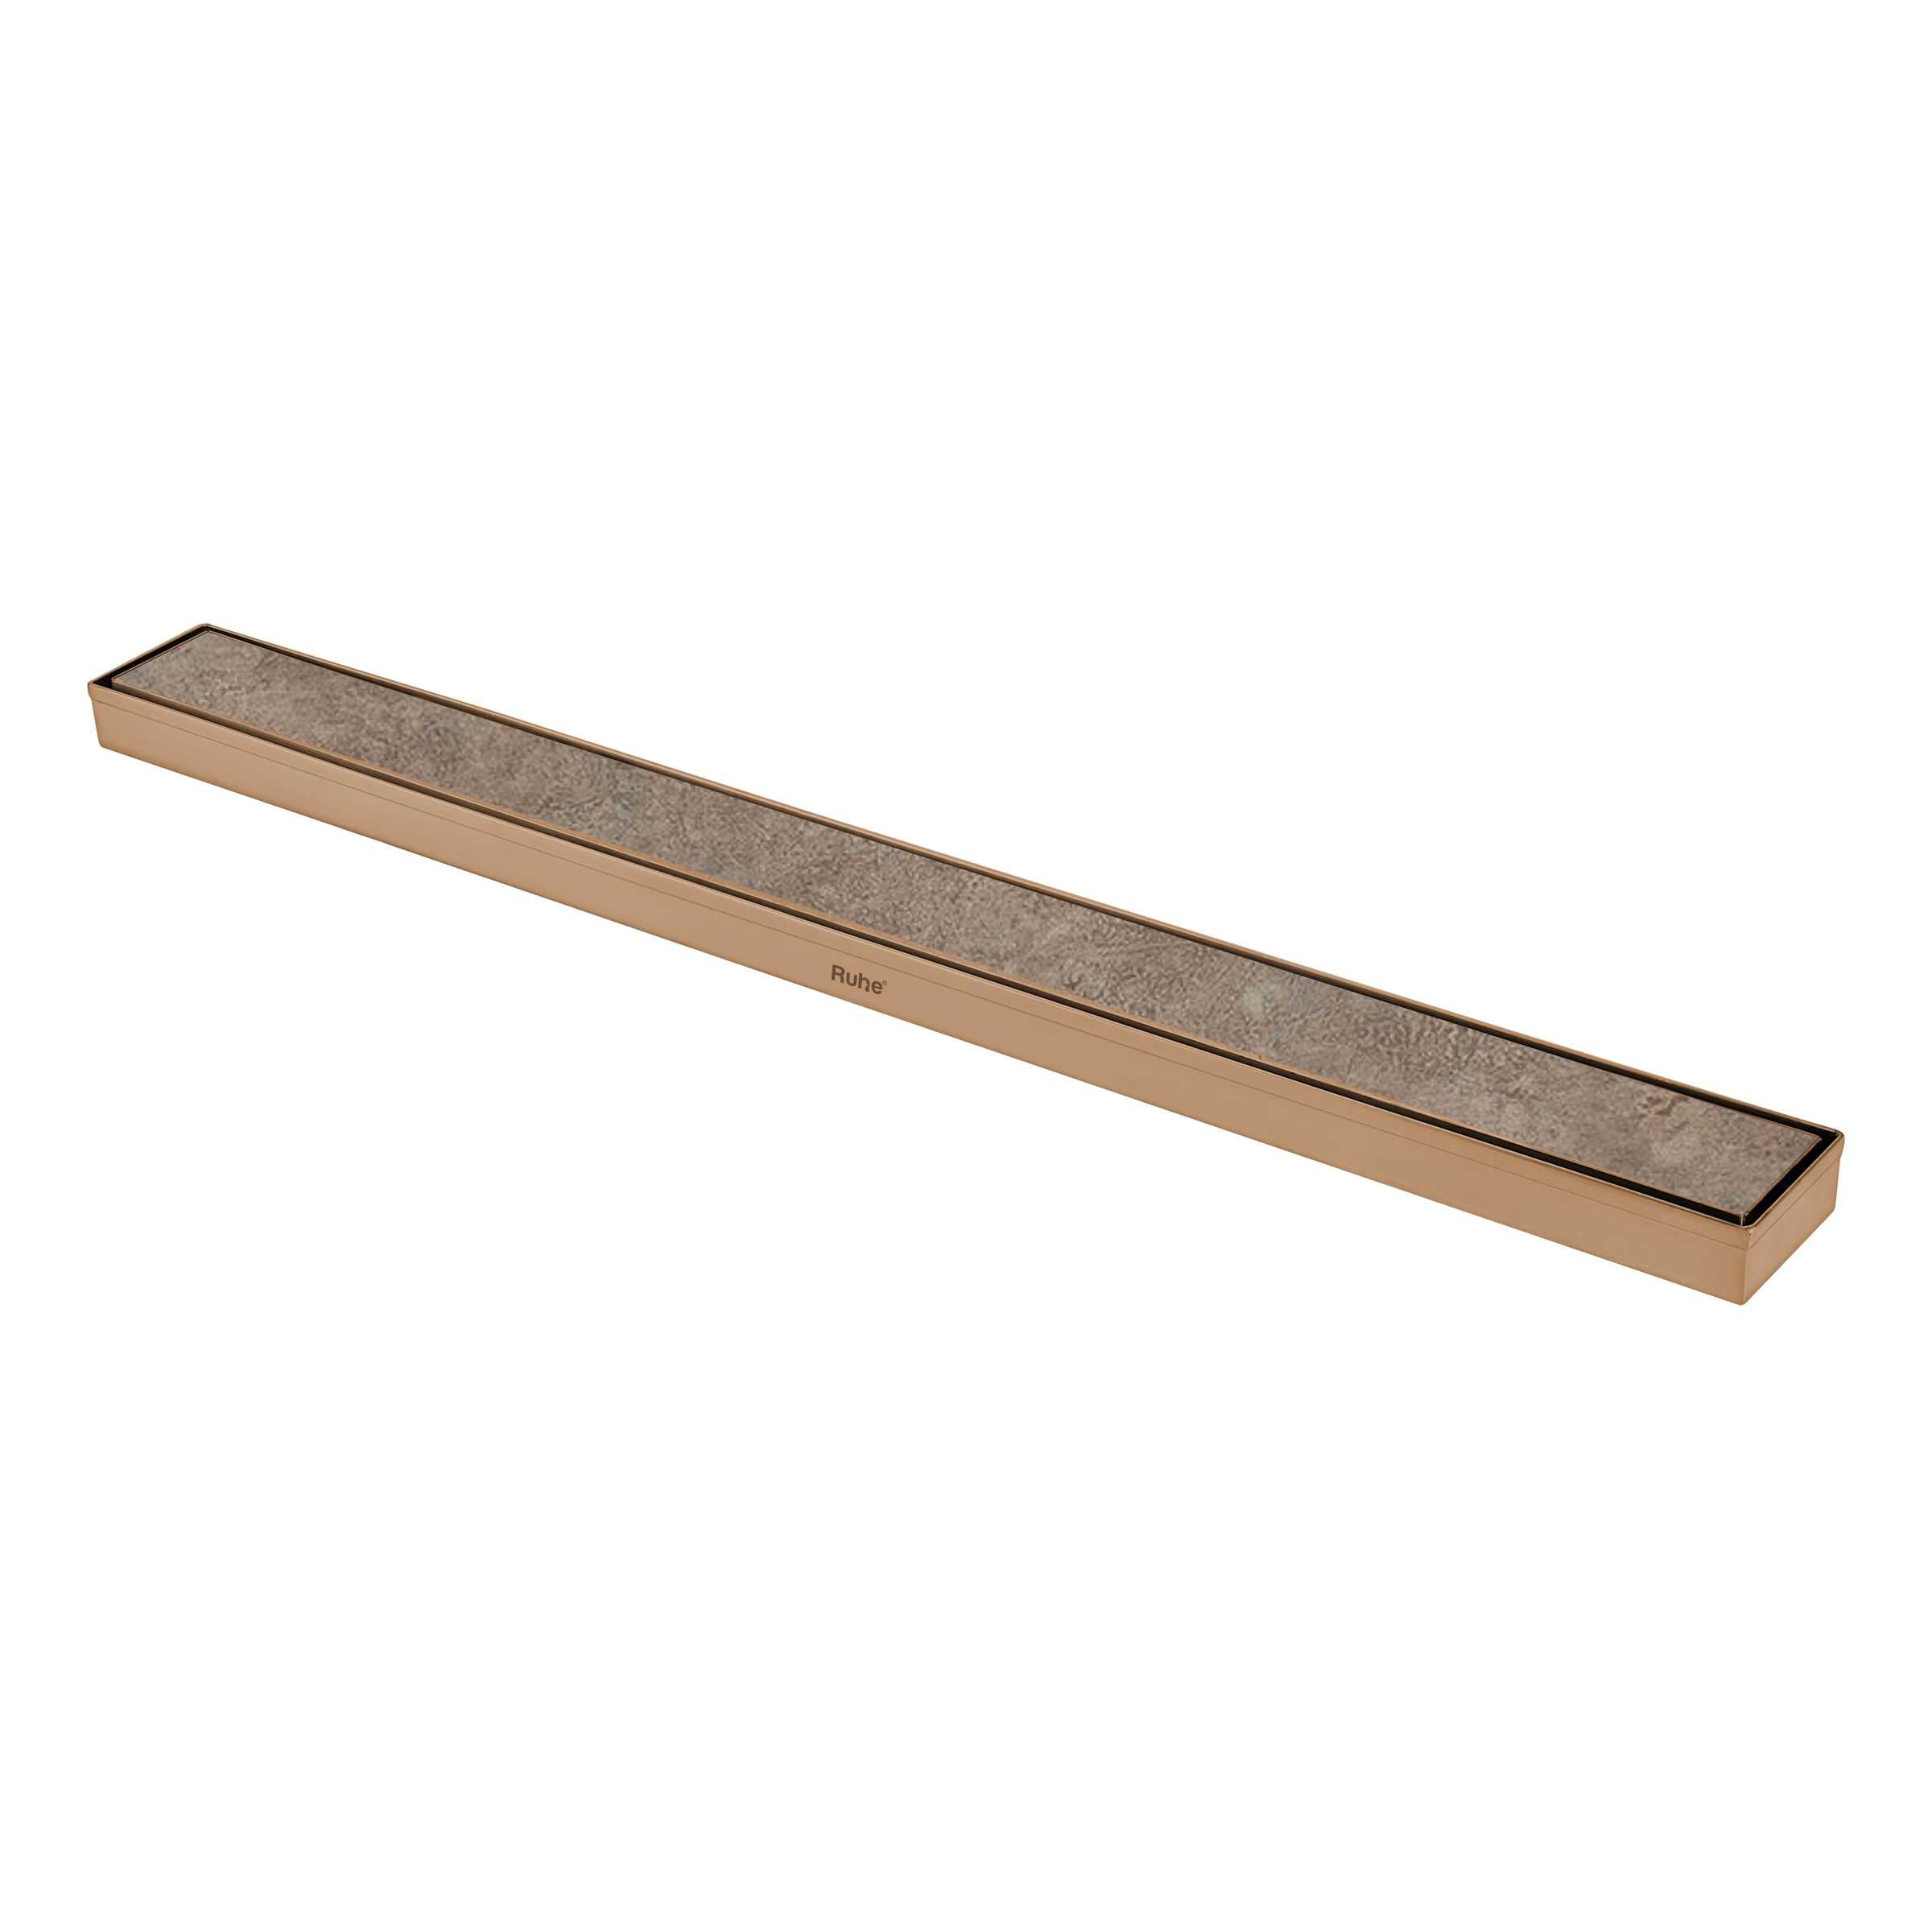 Marble Insert Shower Drain Channel (36 x 2 Inches) ANTIQUE COPPER